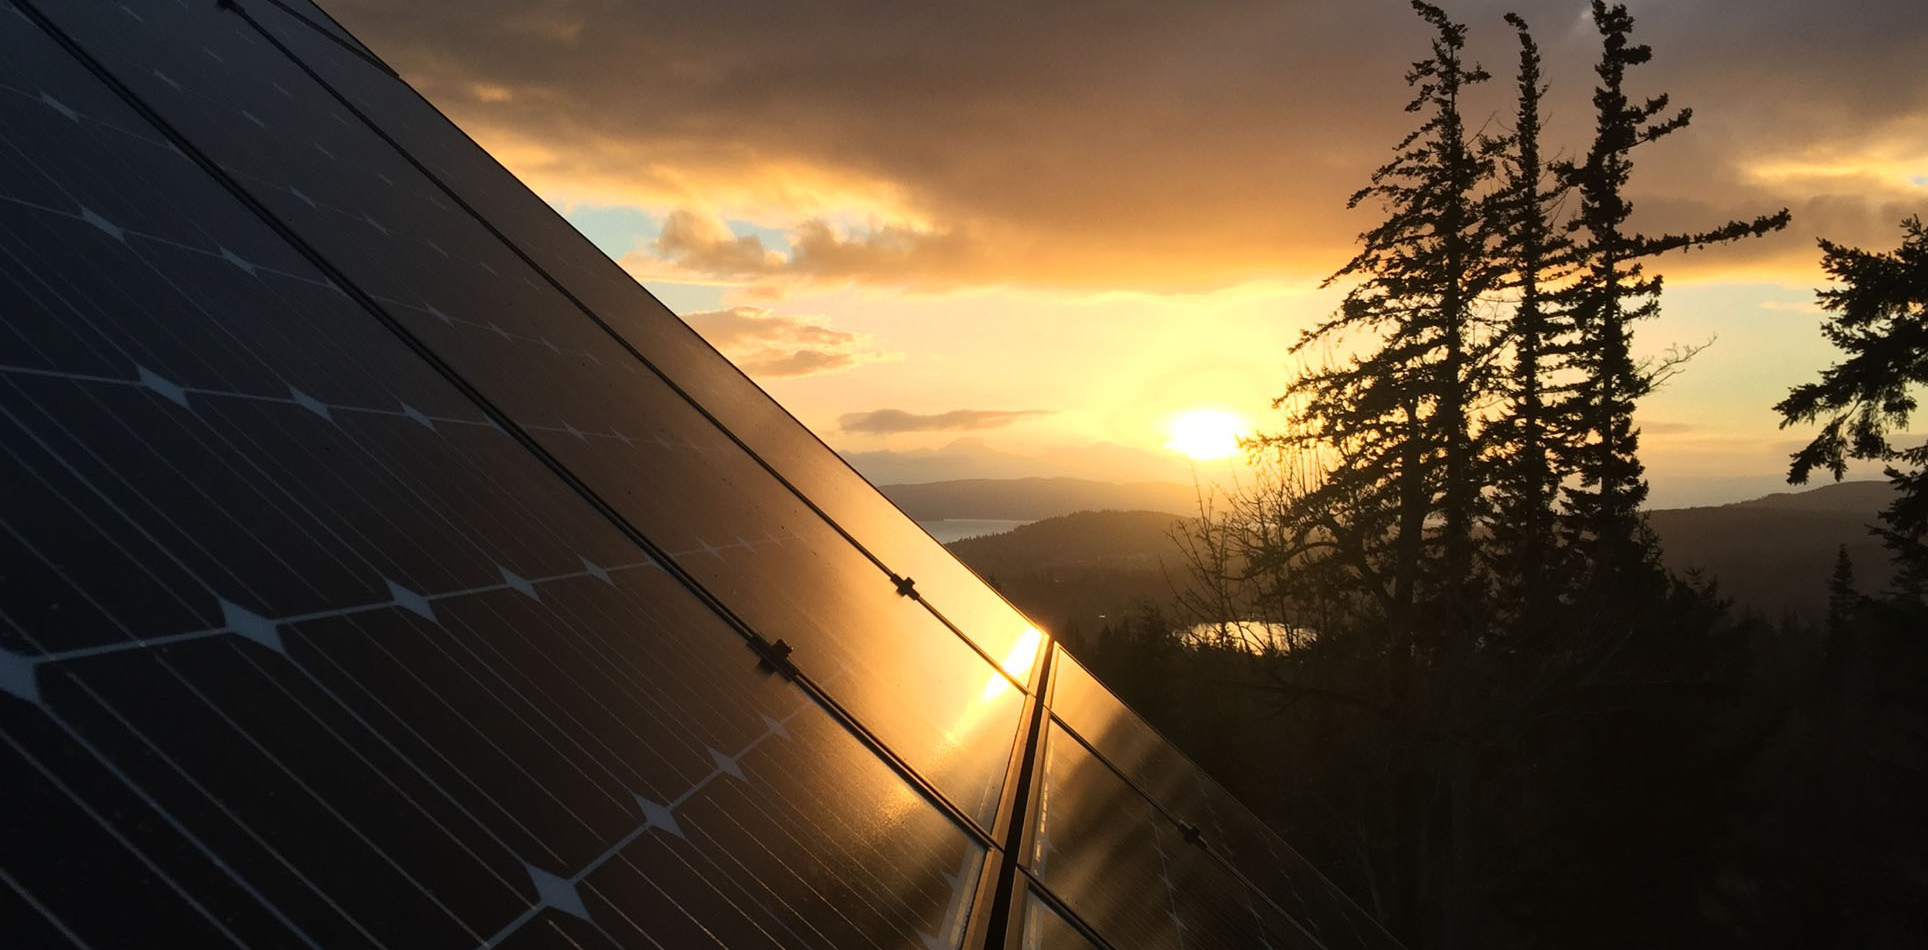 Sunset in the background, solar panel array in the foreground